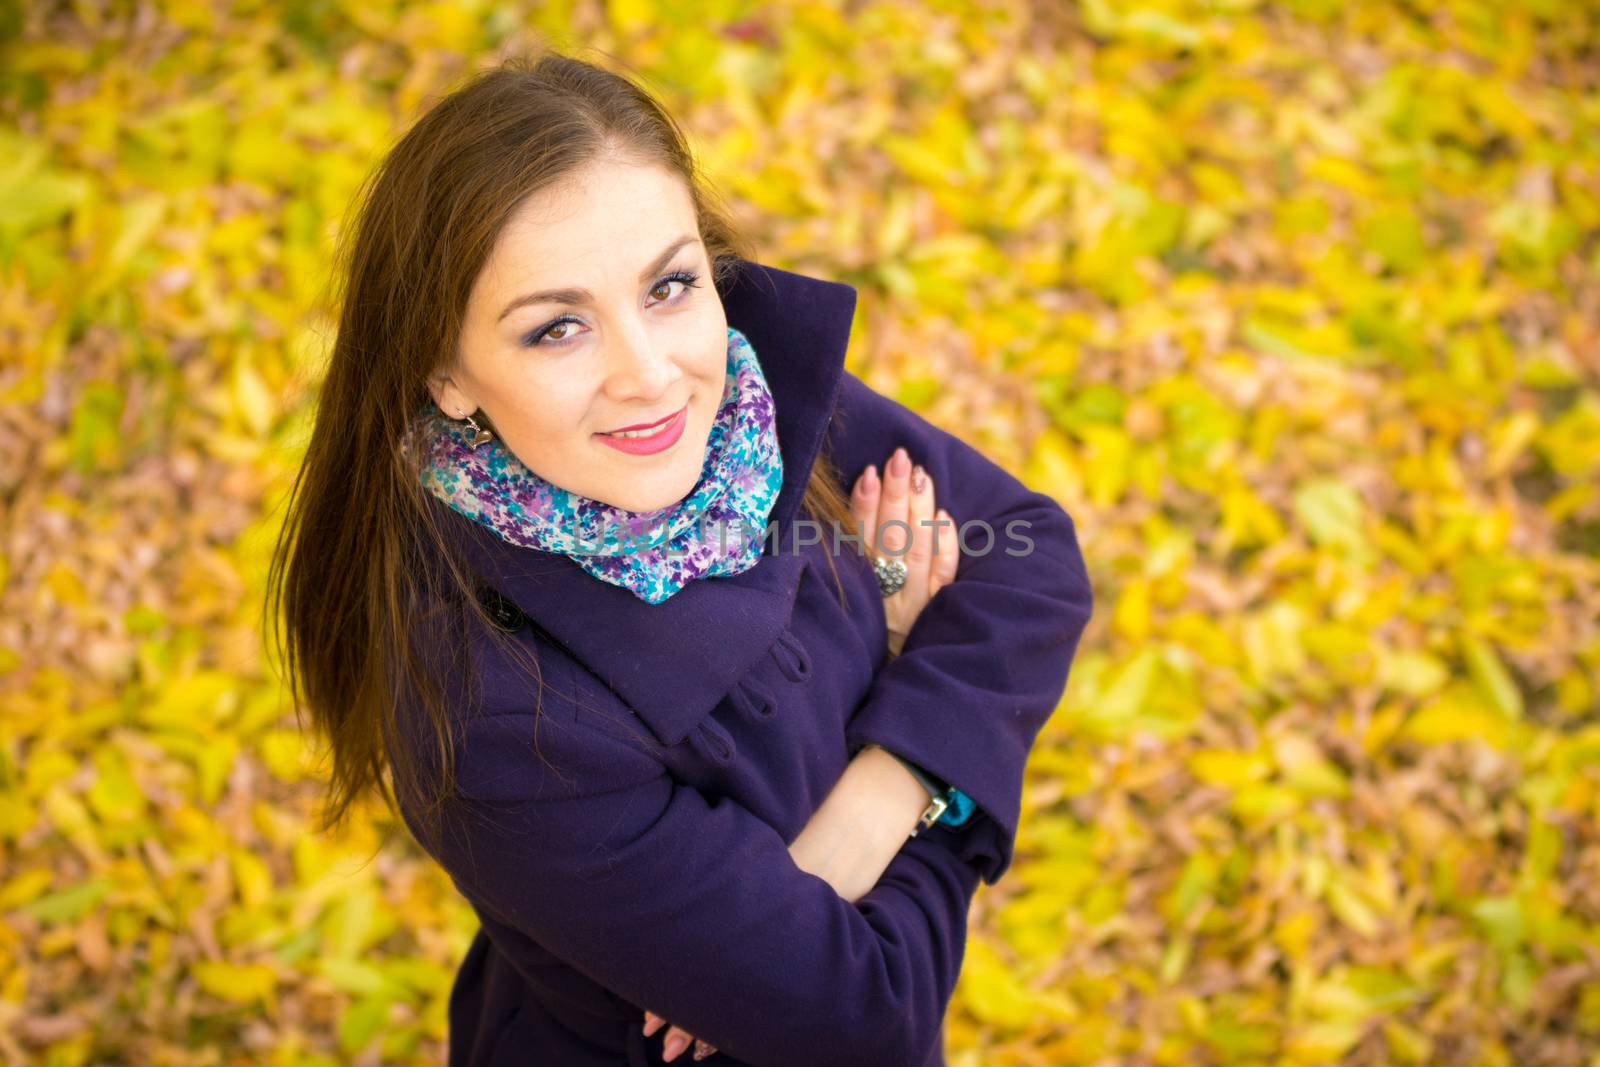 Top view of a beautiful girl against the backdrop of autumn foliage